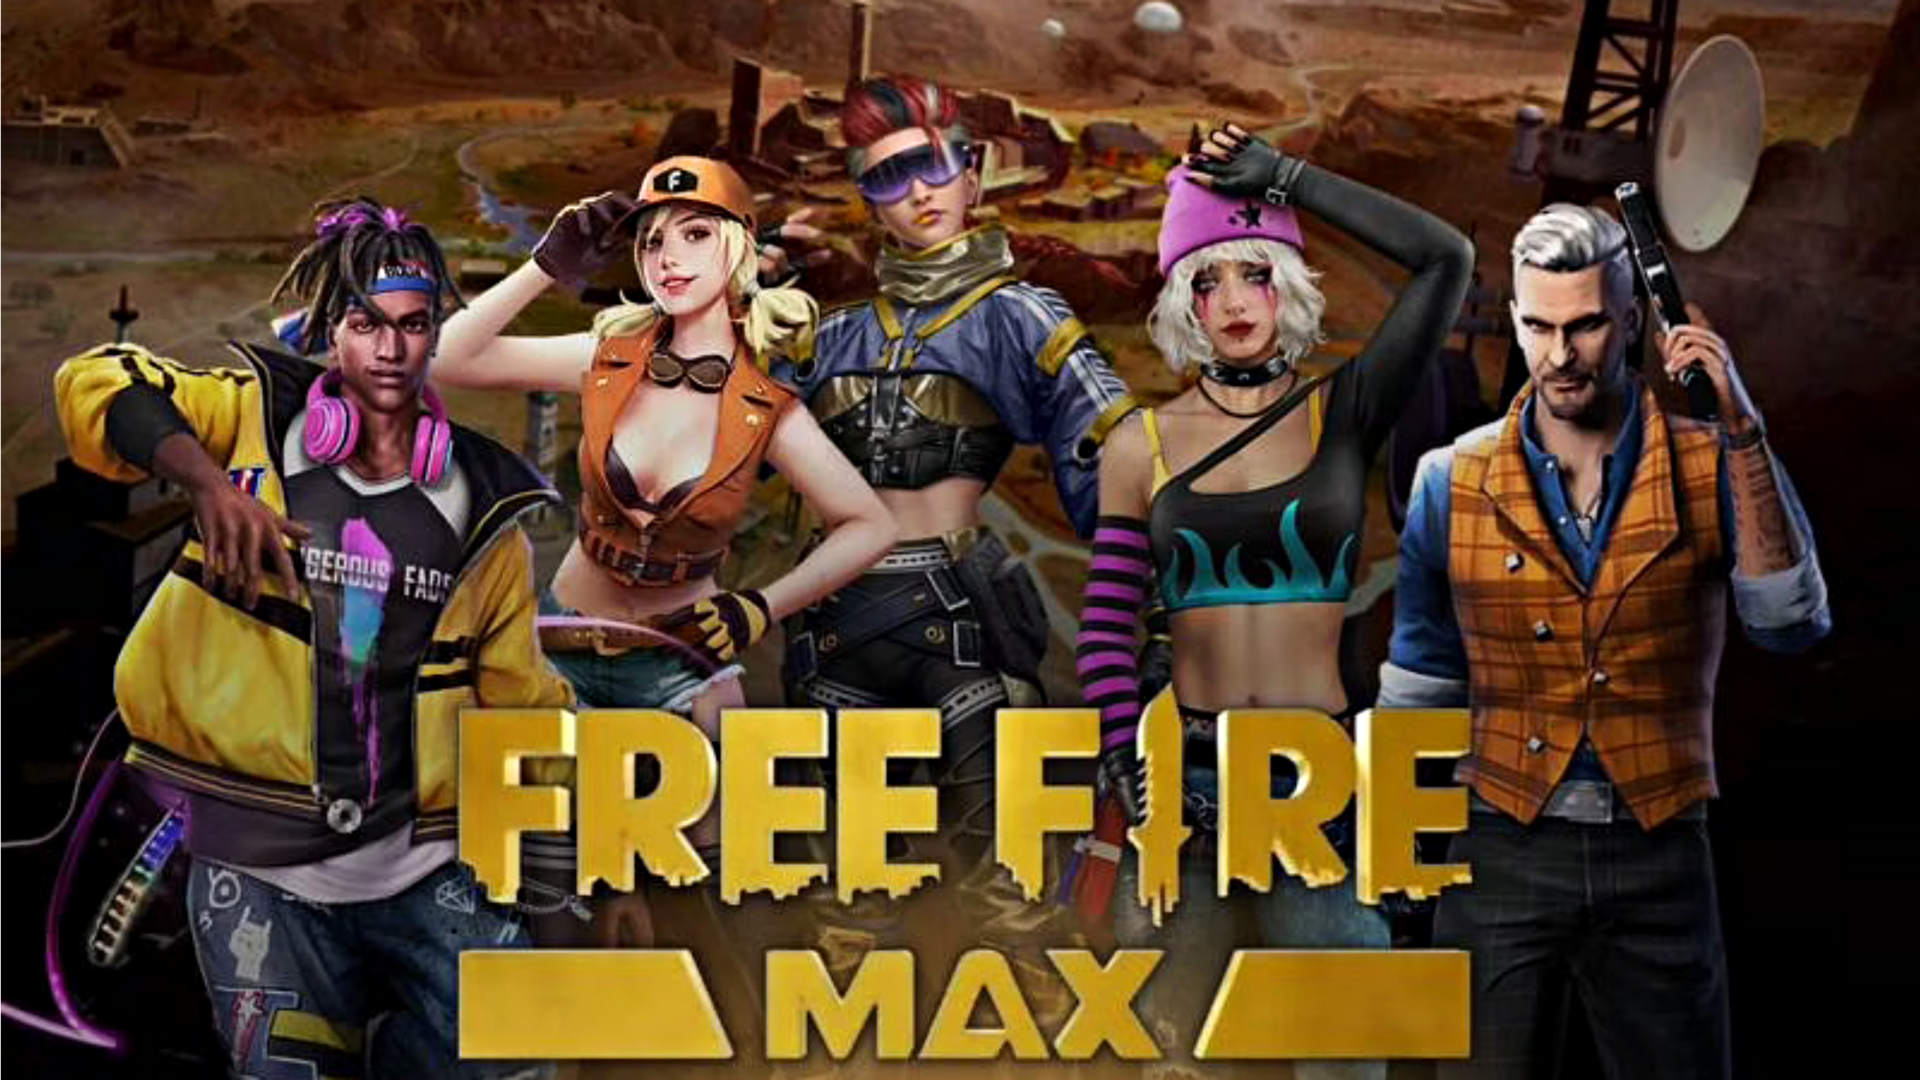 Free Fire MAX codes for June 18: How to redeem